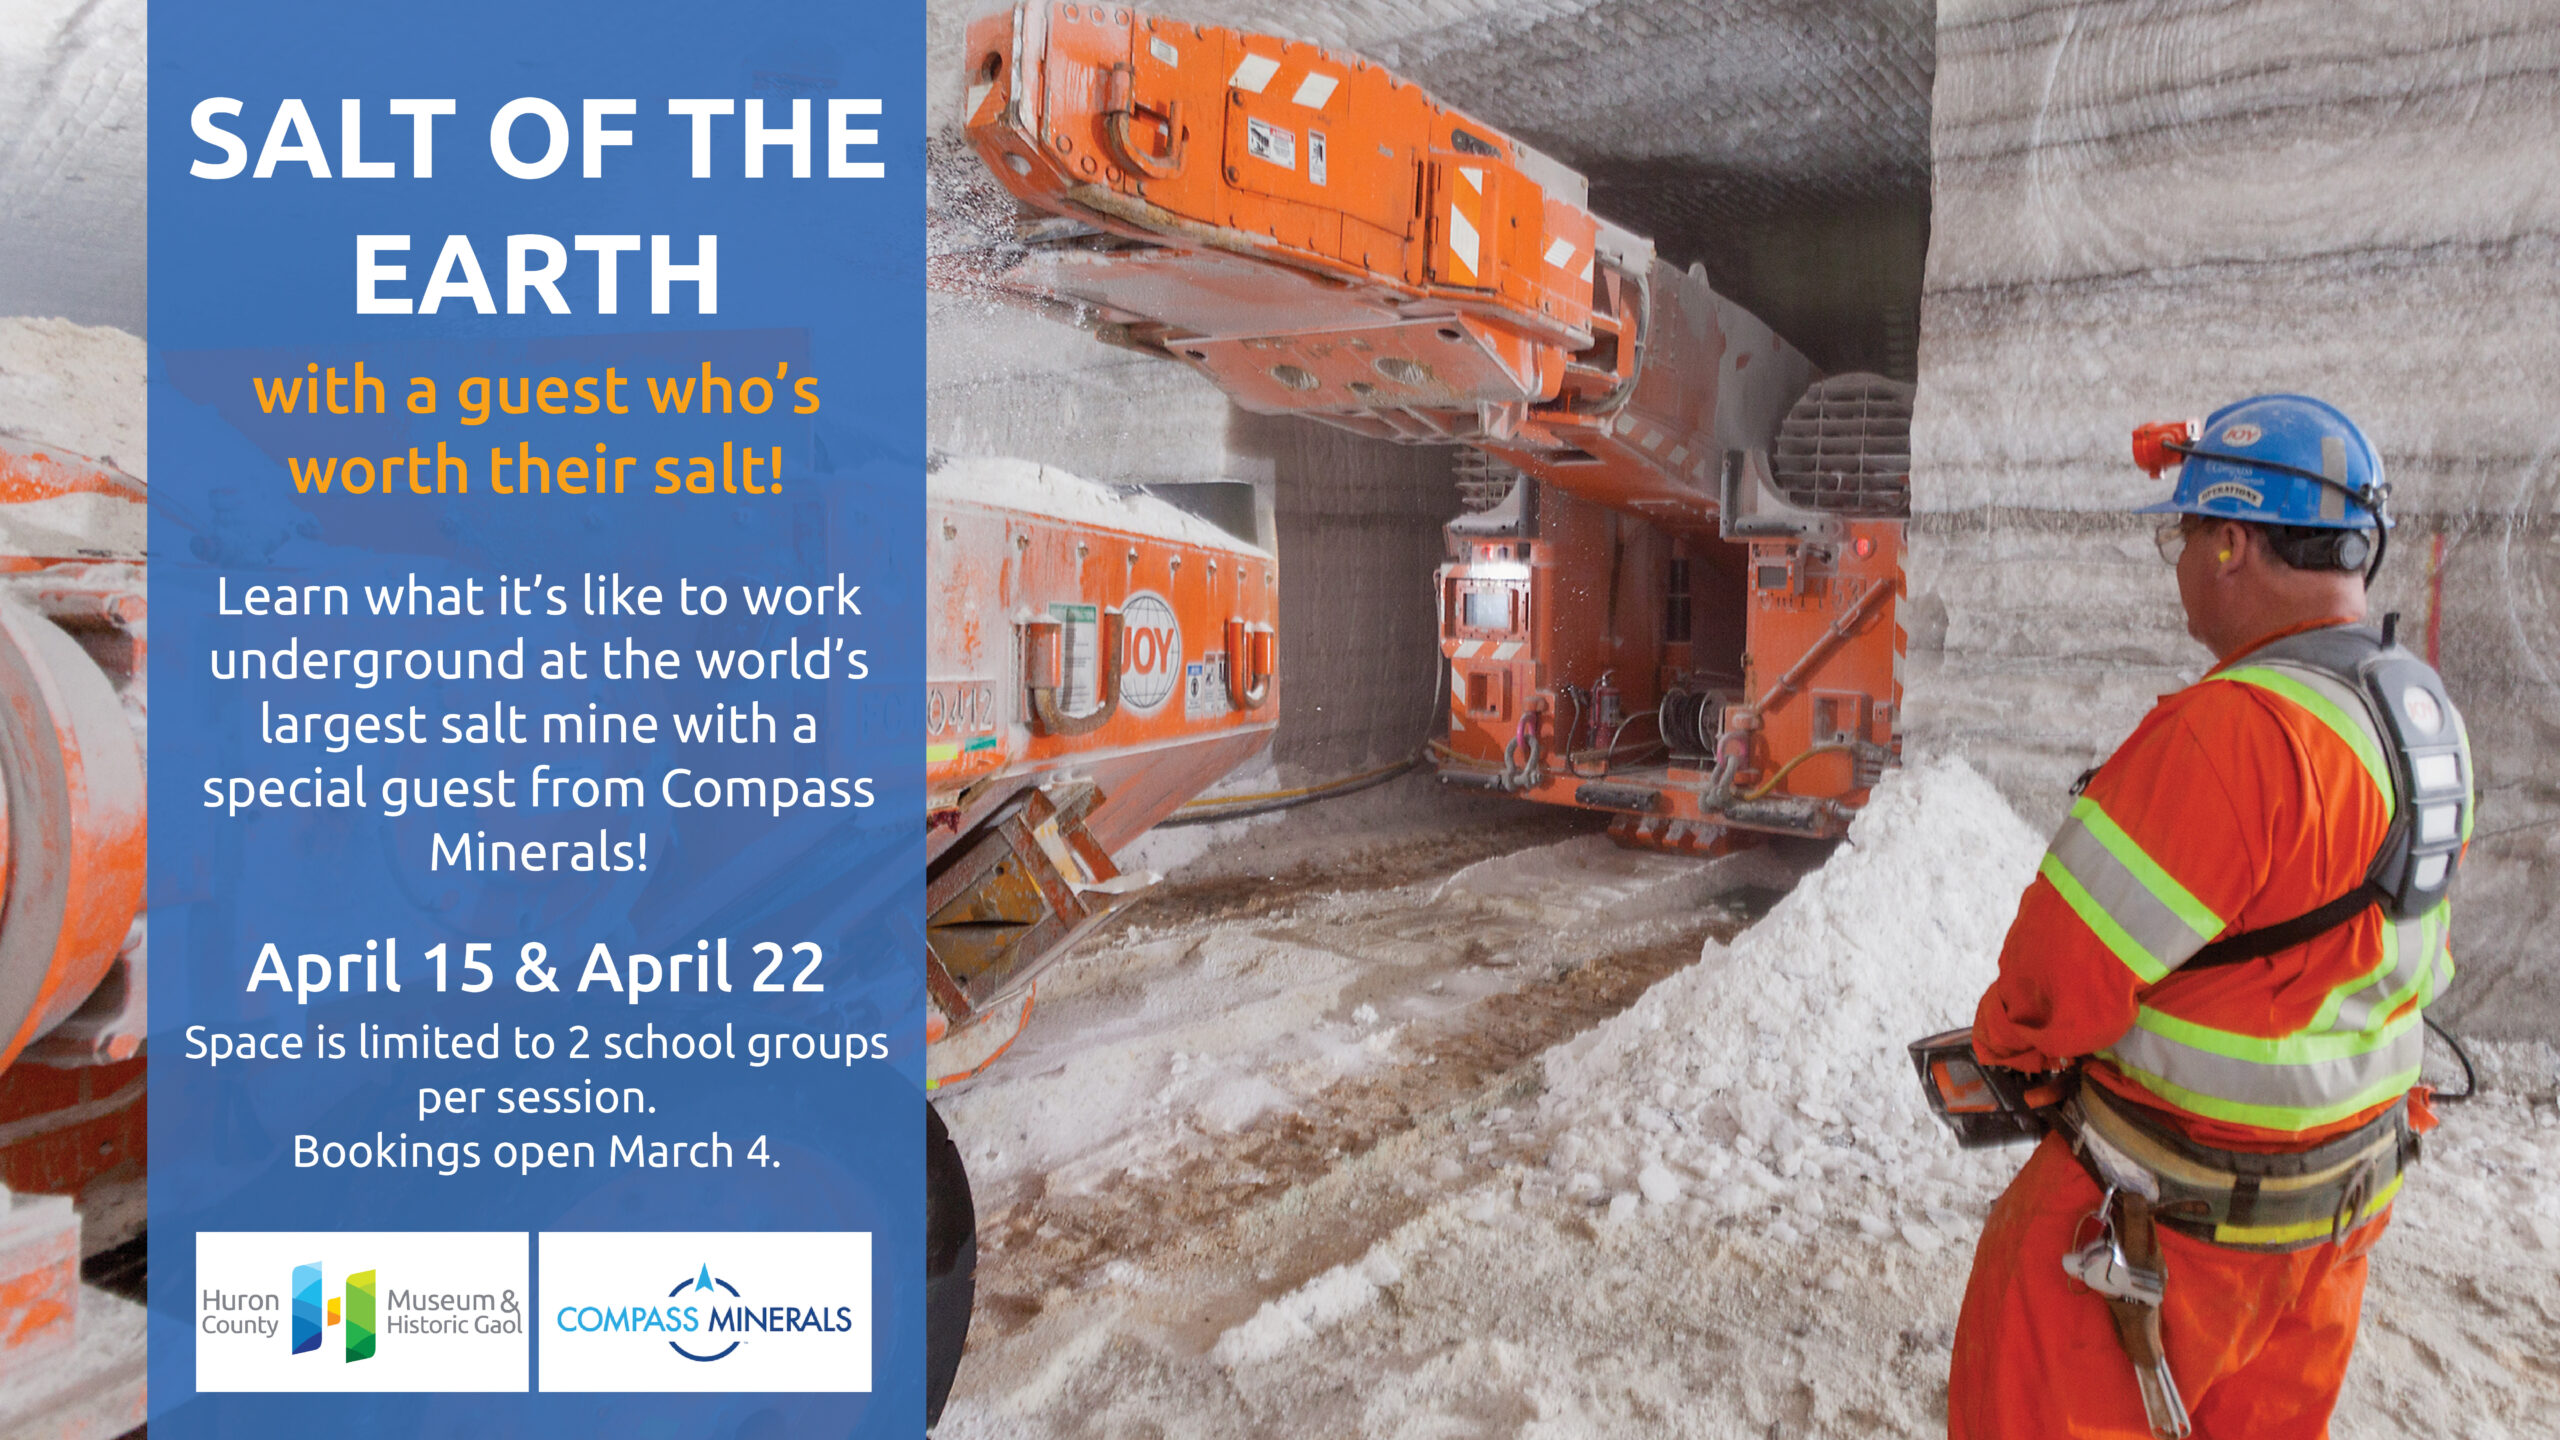 Photo of a salt miner working underground at Compass Minerals, Goderich. Text promotes special Salt of the Earth program for school groups